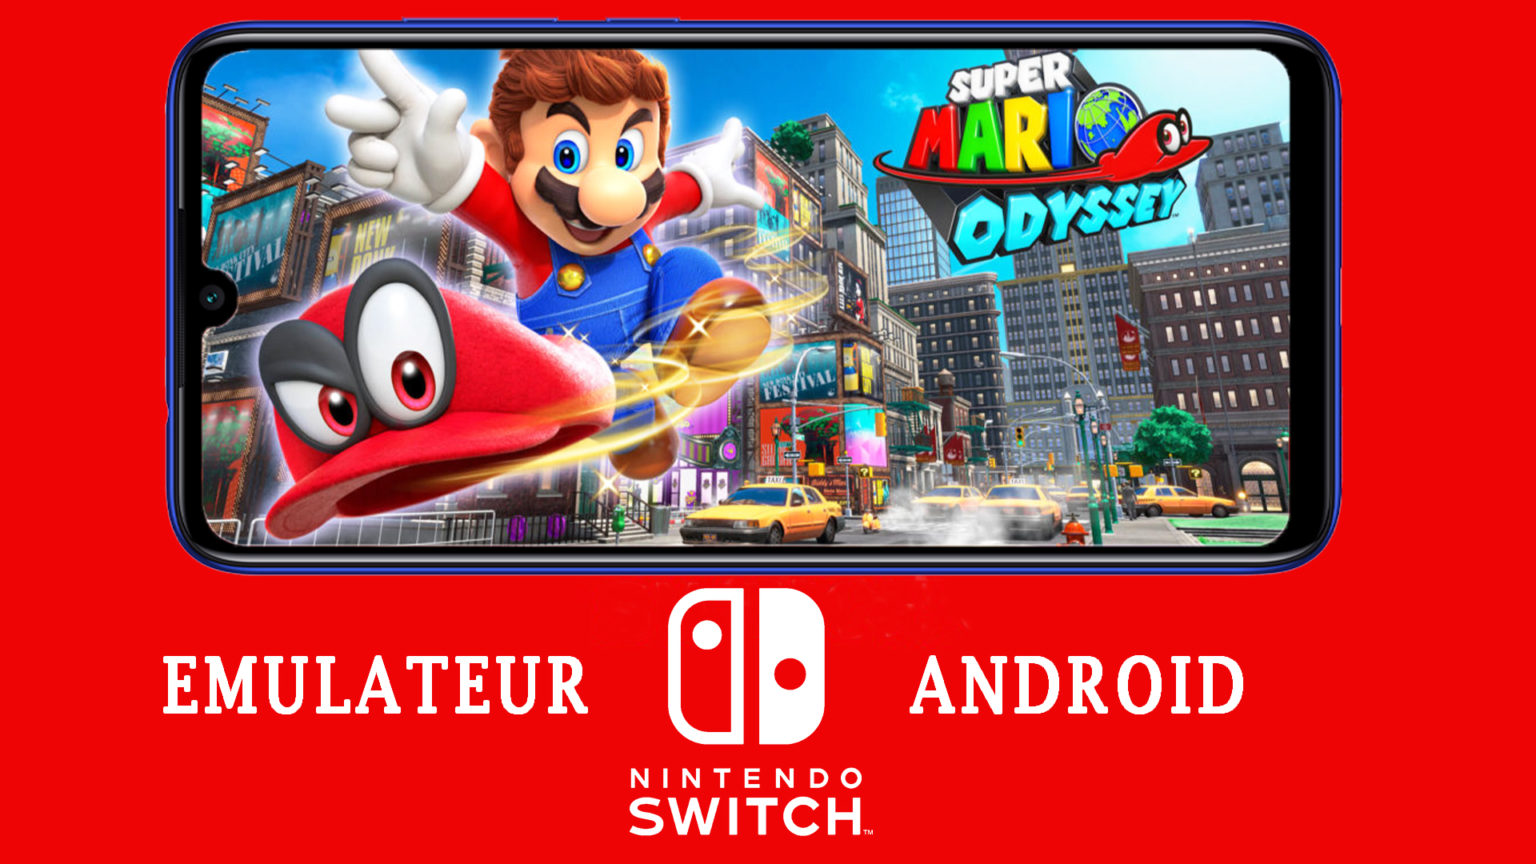 nintendo switch emulator apk for android